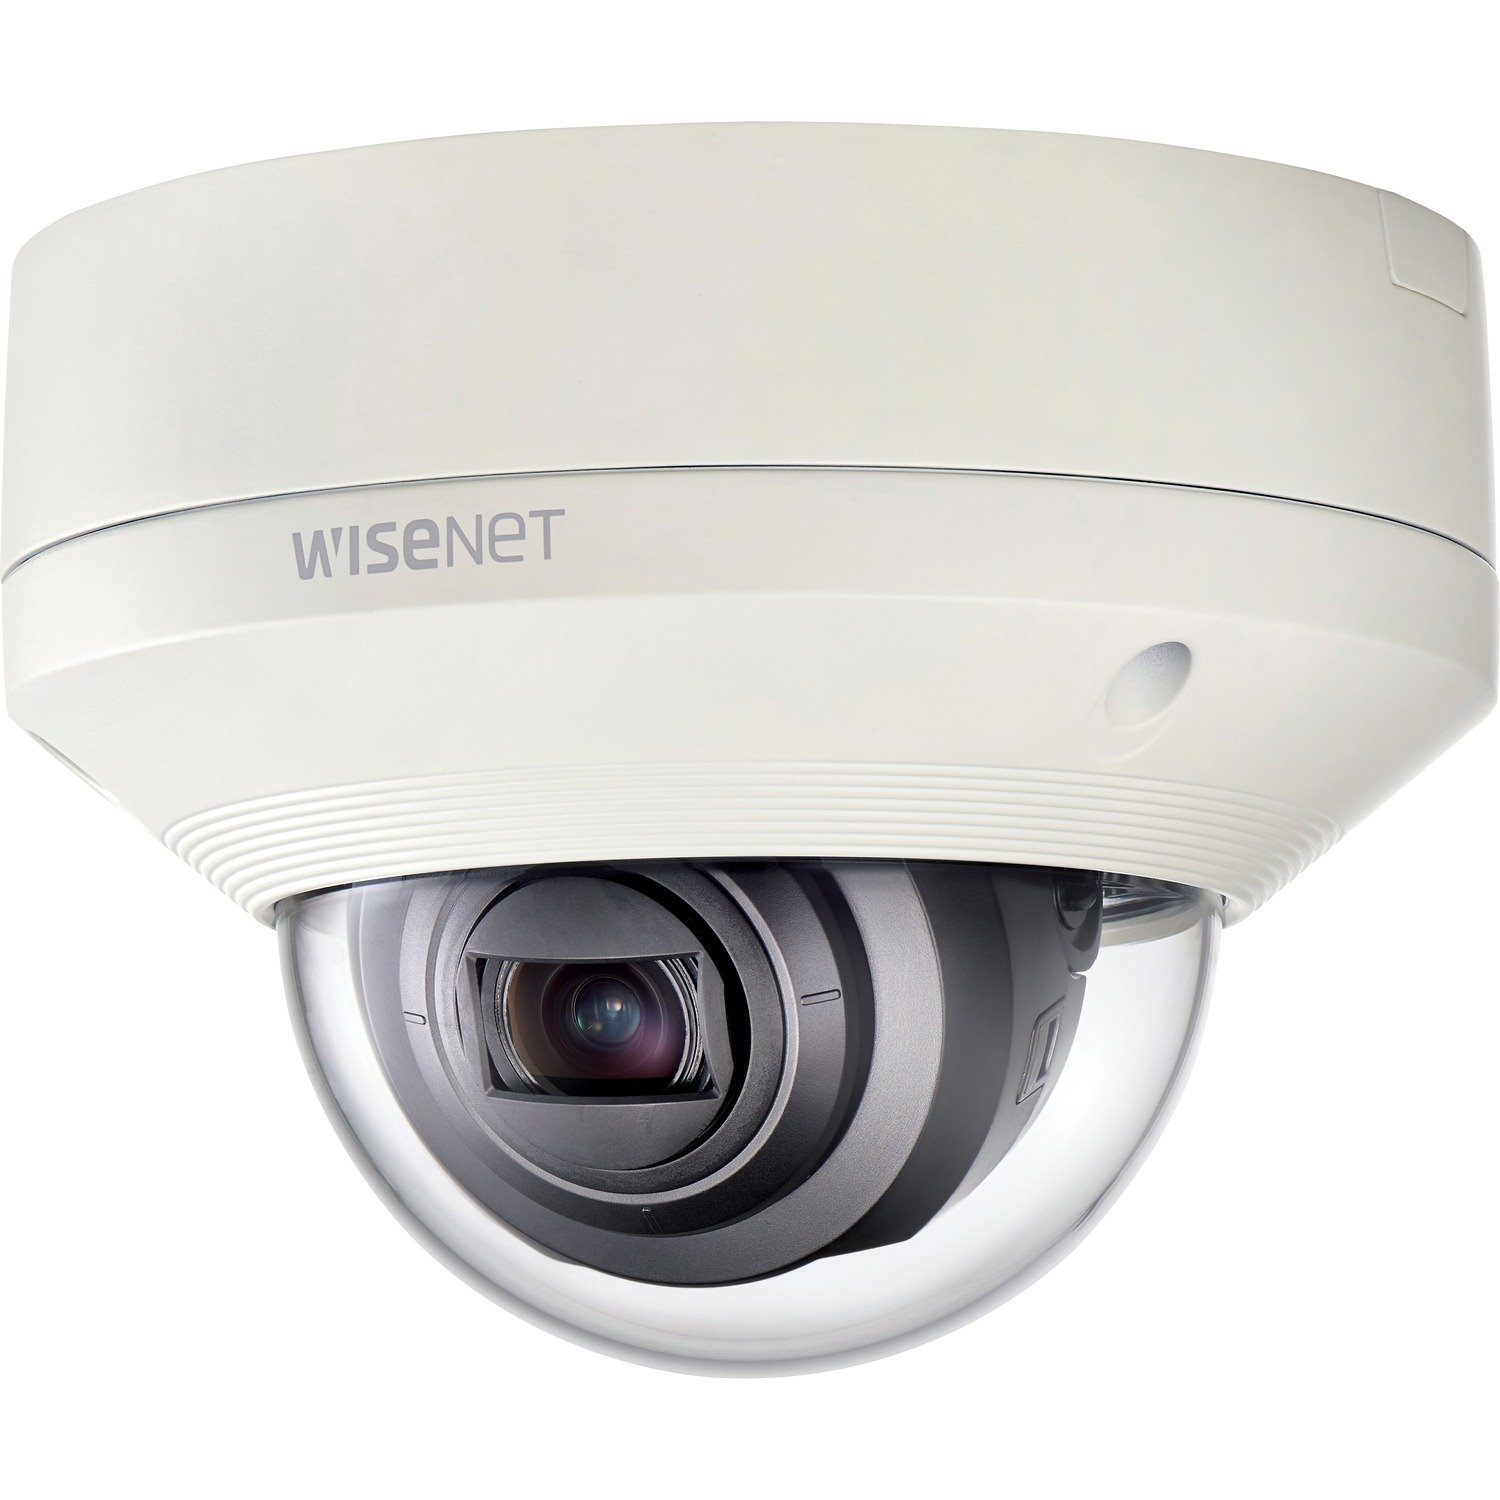 Wisenet XNV-6080 2 Megapixel Outdoor Full HD Network Camera - Monochrome, Color - Dome - Ivory